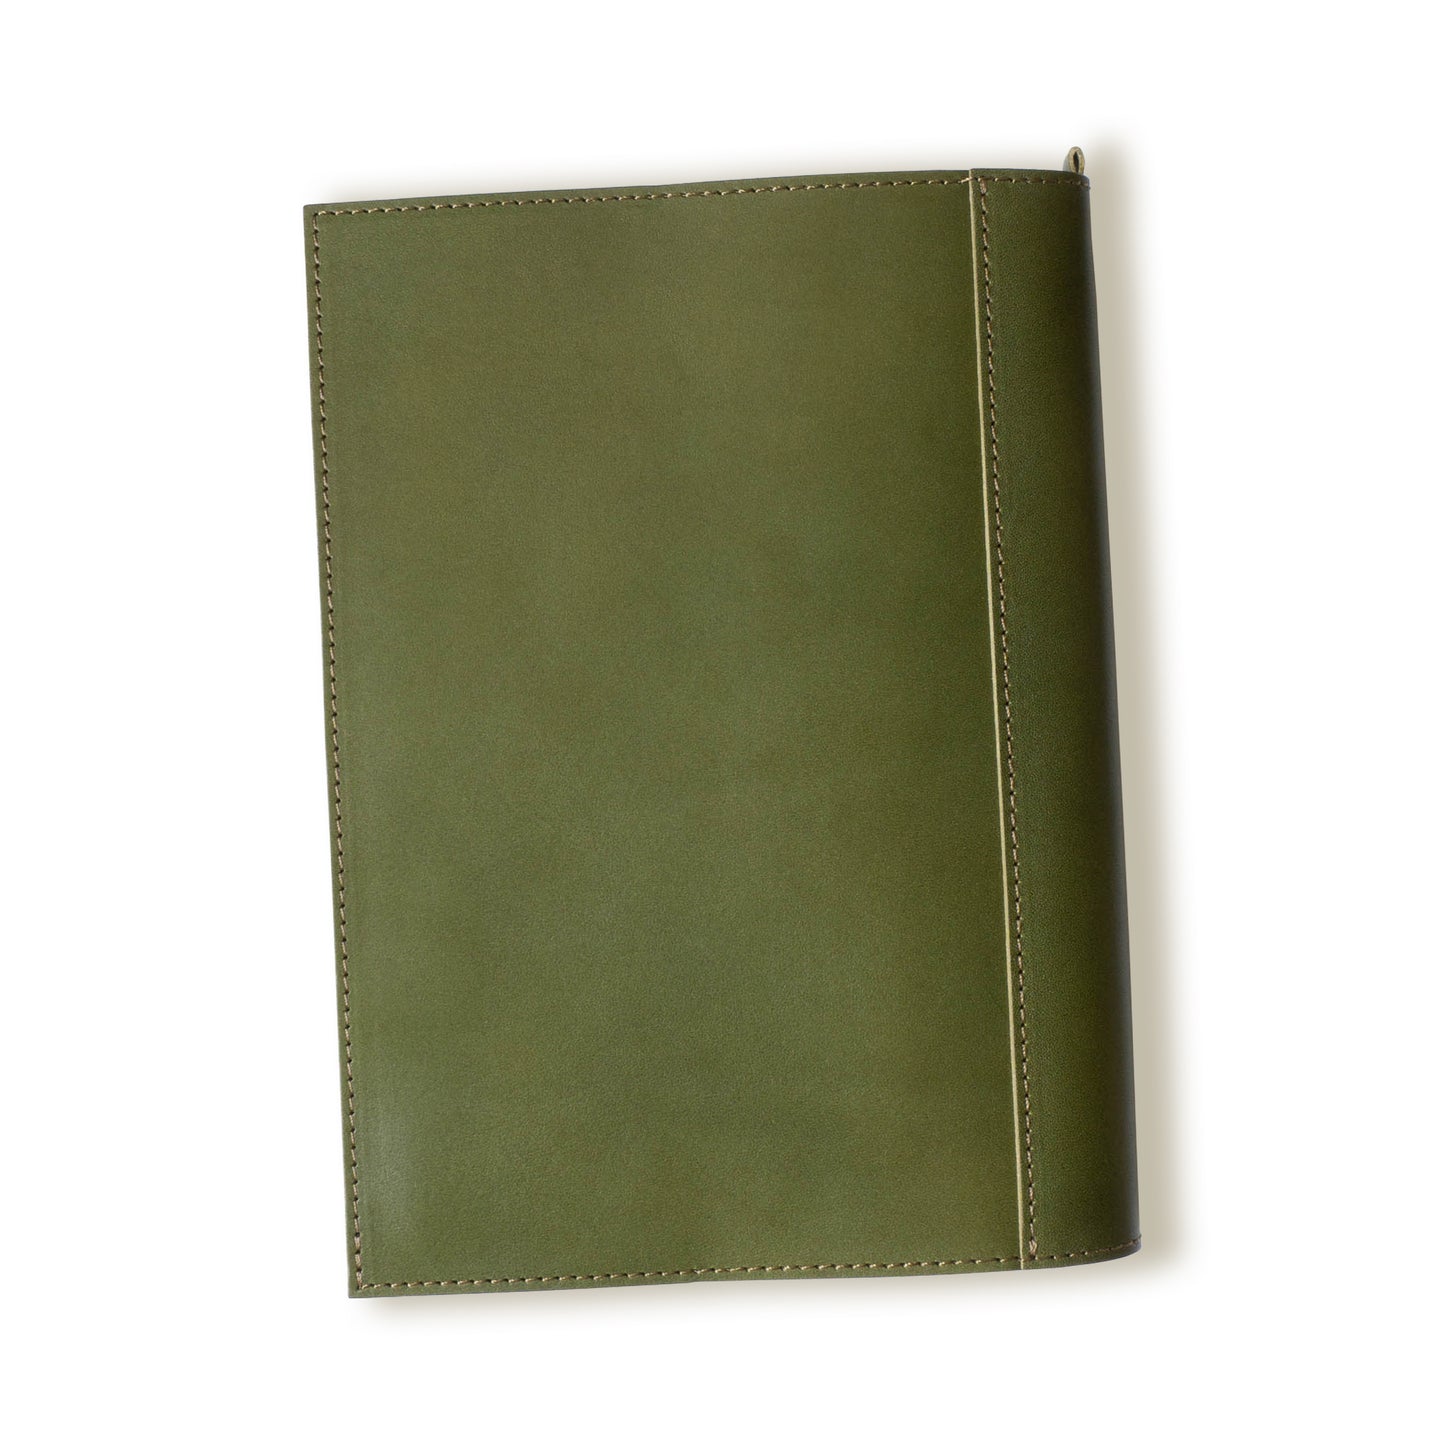 [Japanese Craftsman Made / Classic] Book cover 46 size / 46 size hard cover Genuine leather bookmark included